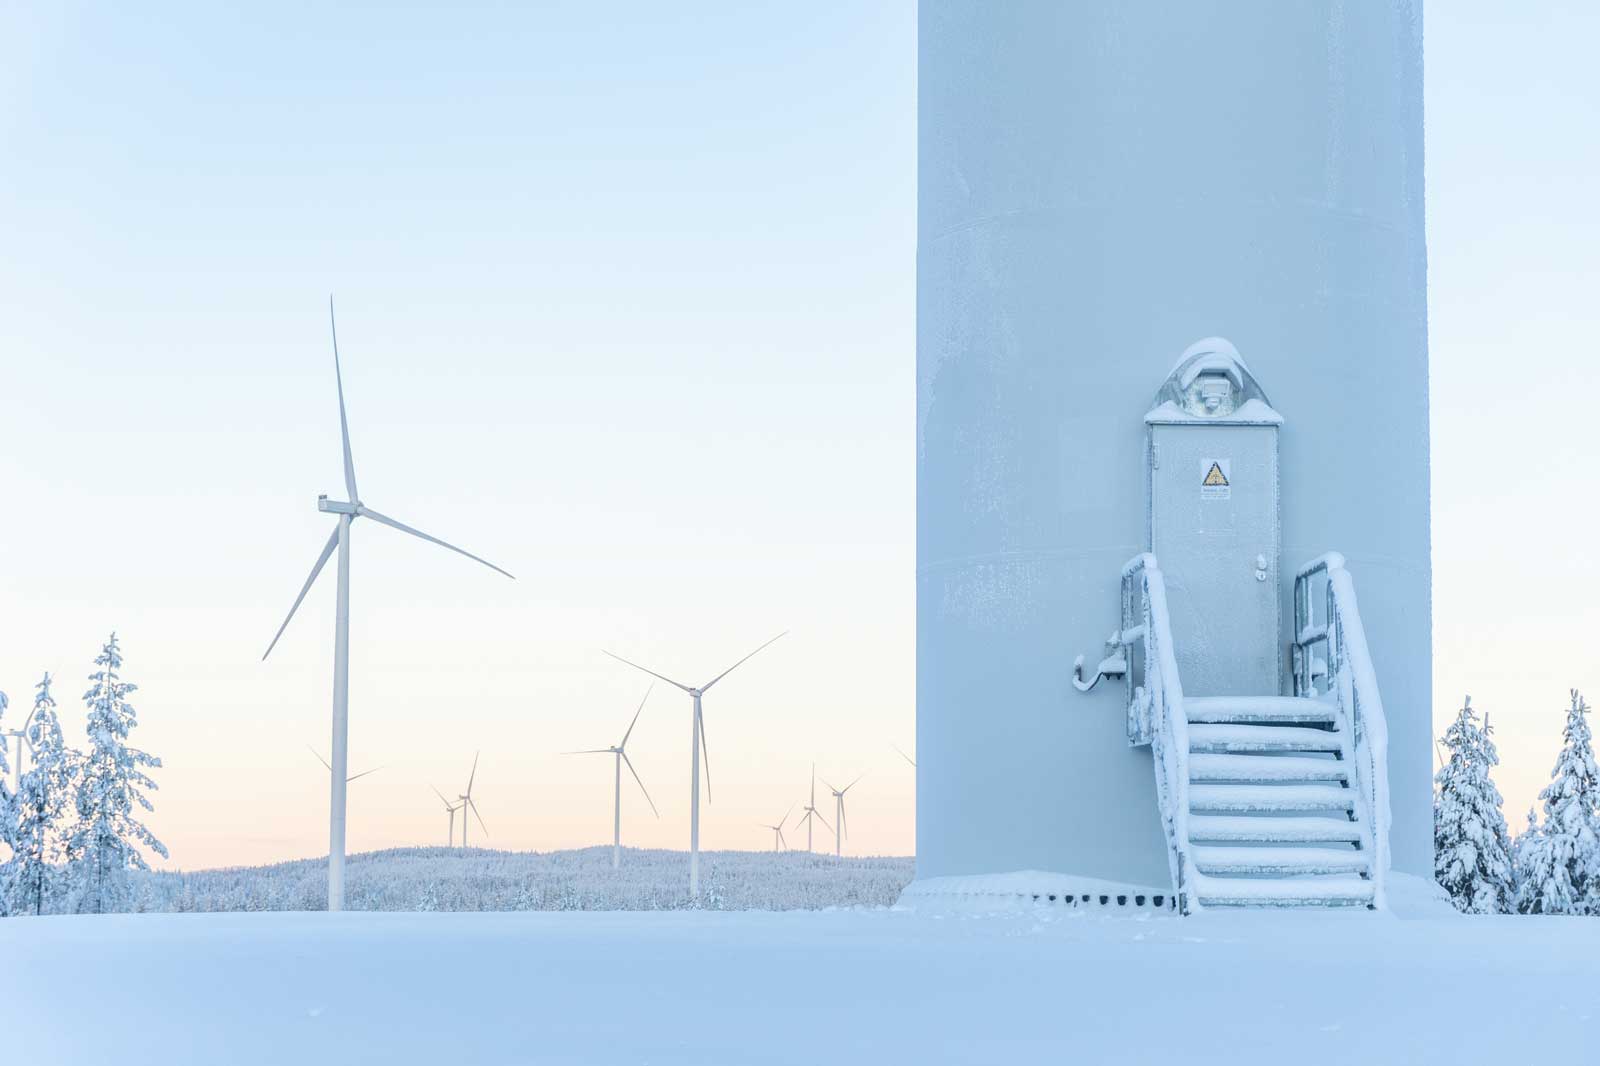 Strengthens Europe's energy security | RWE in the Nordics